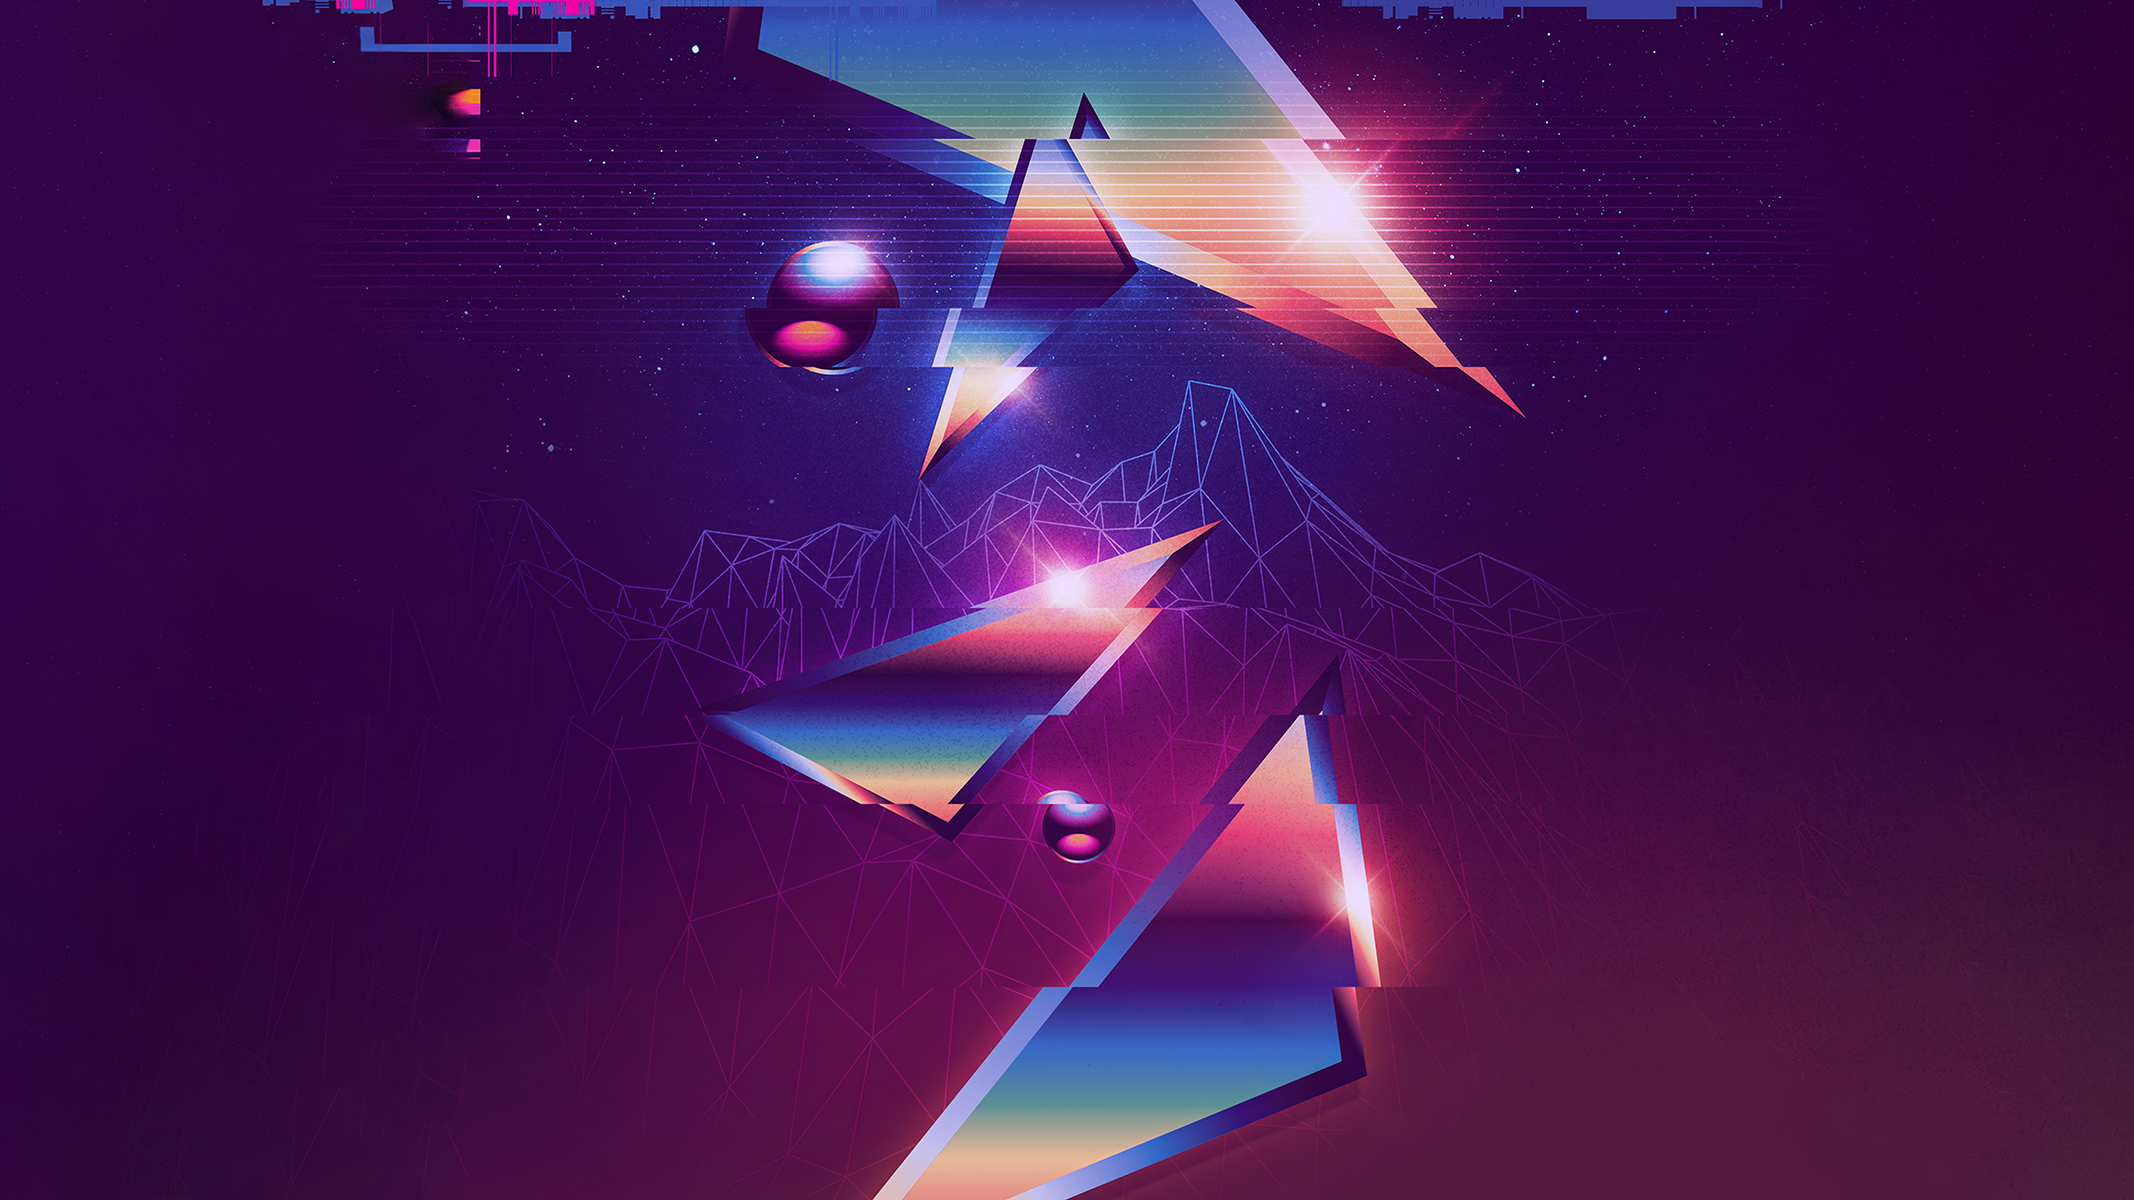 Playlist III by Signalnoise, 1920x1080 Wallpaper